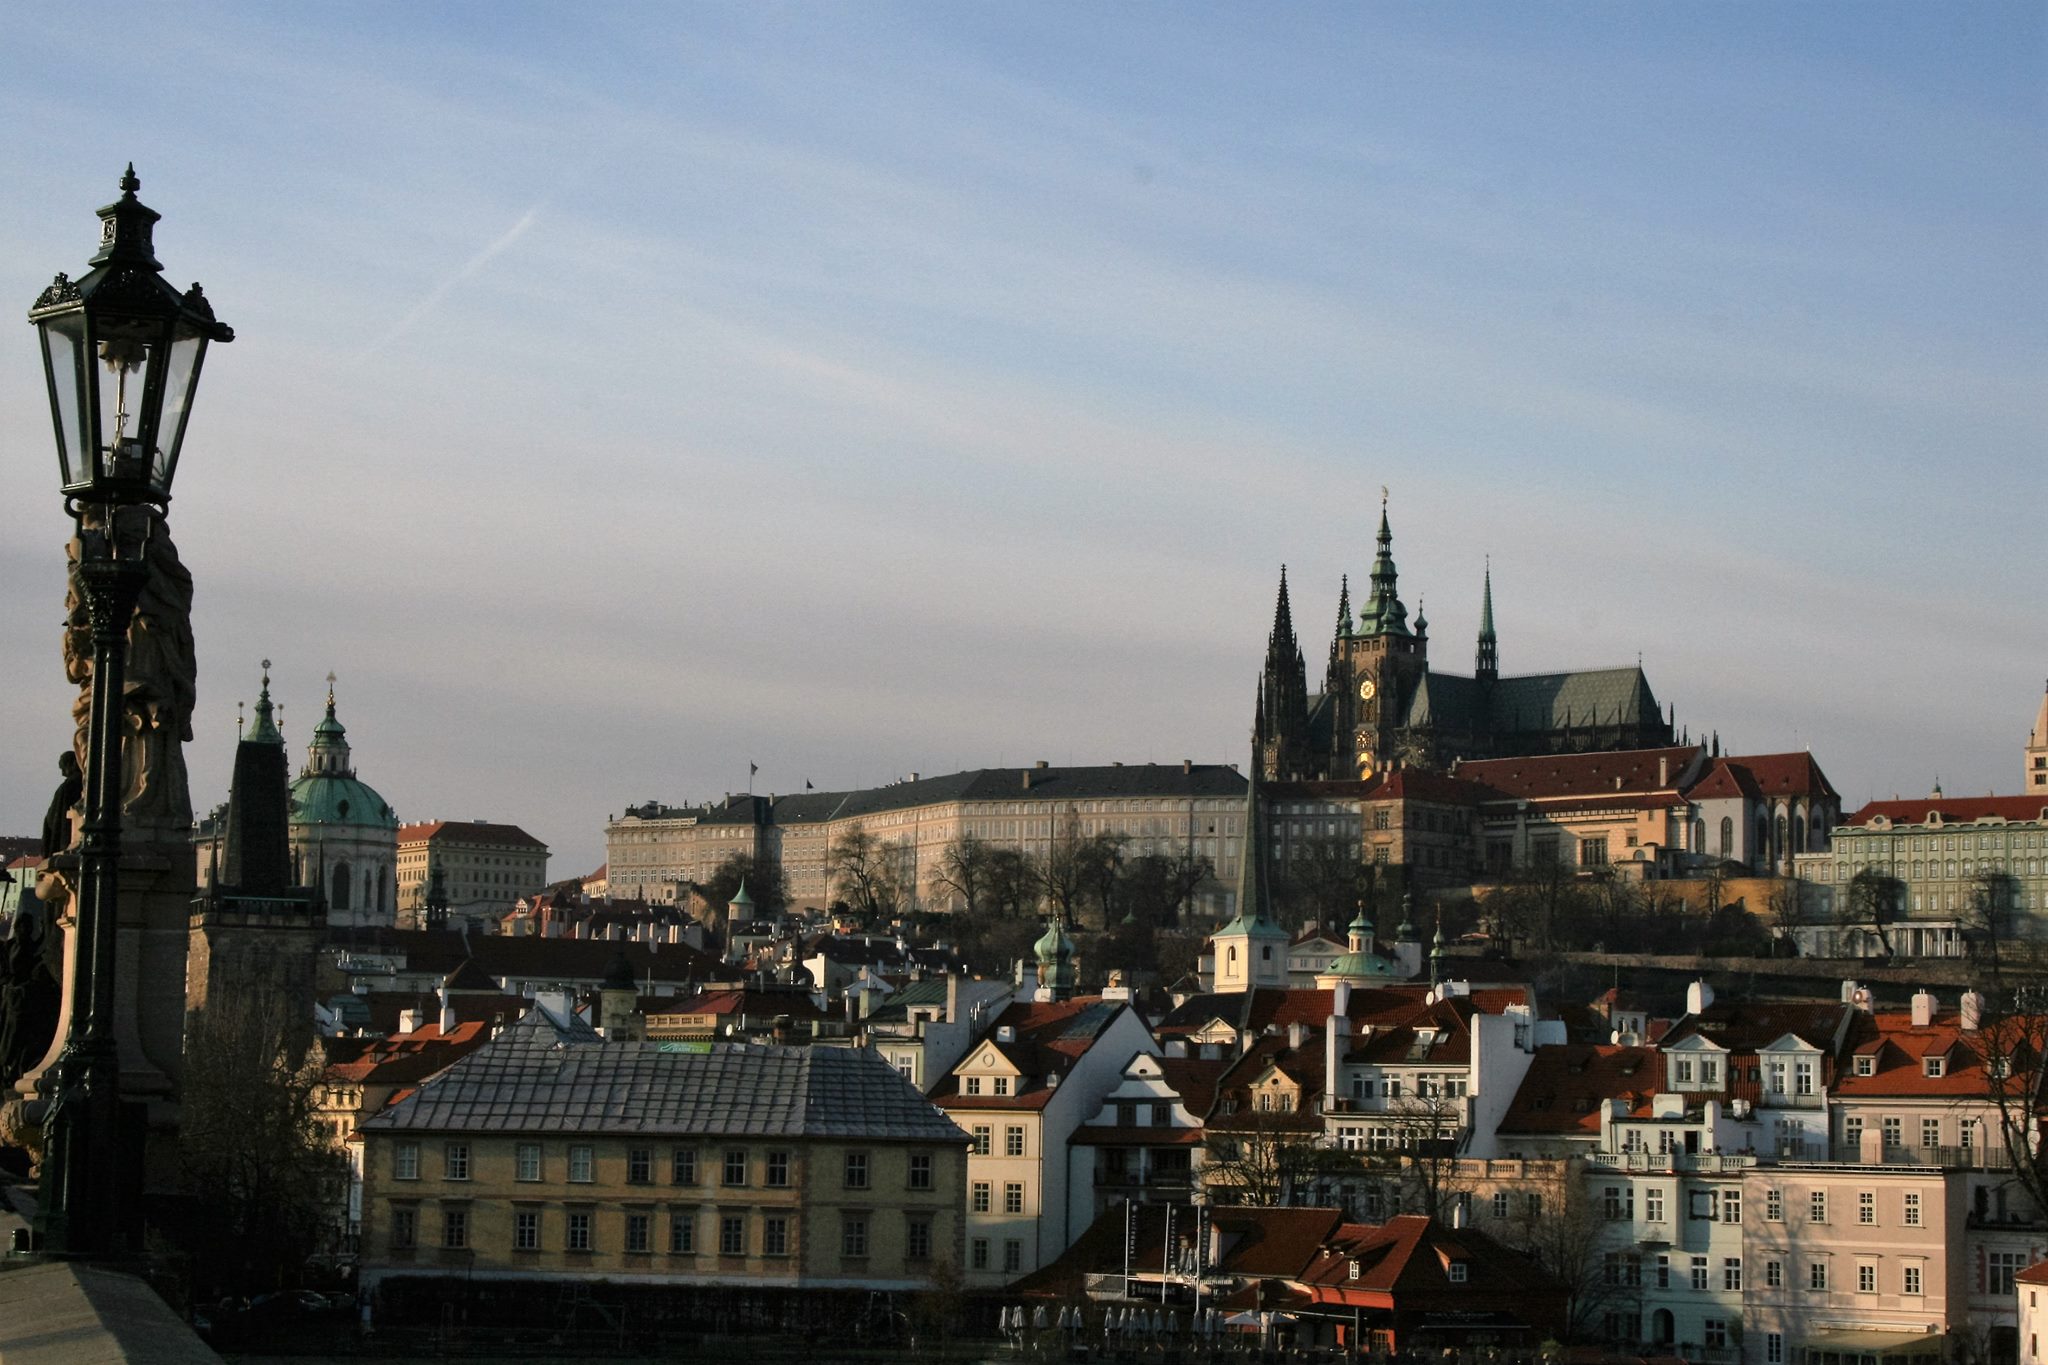 Prague, Czech Republic - Top Destinations to visit in 2017 recommended by #travel bloggers